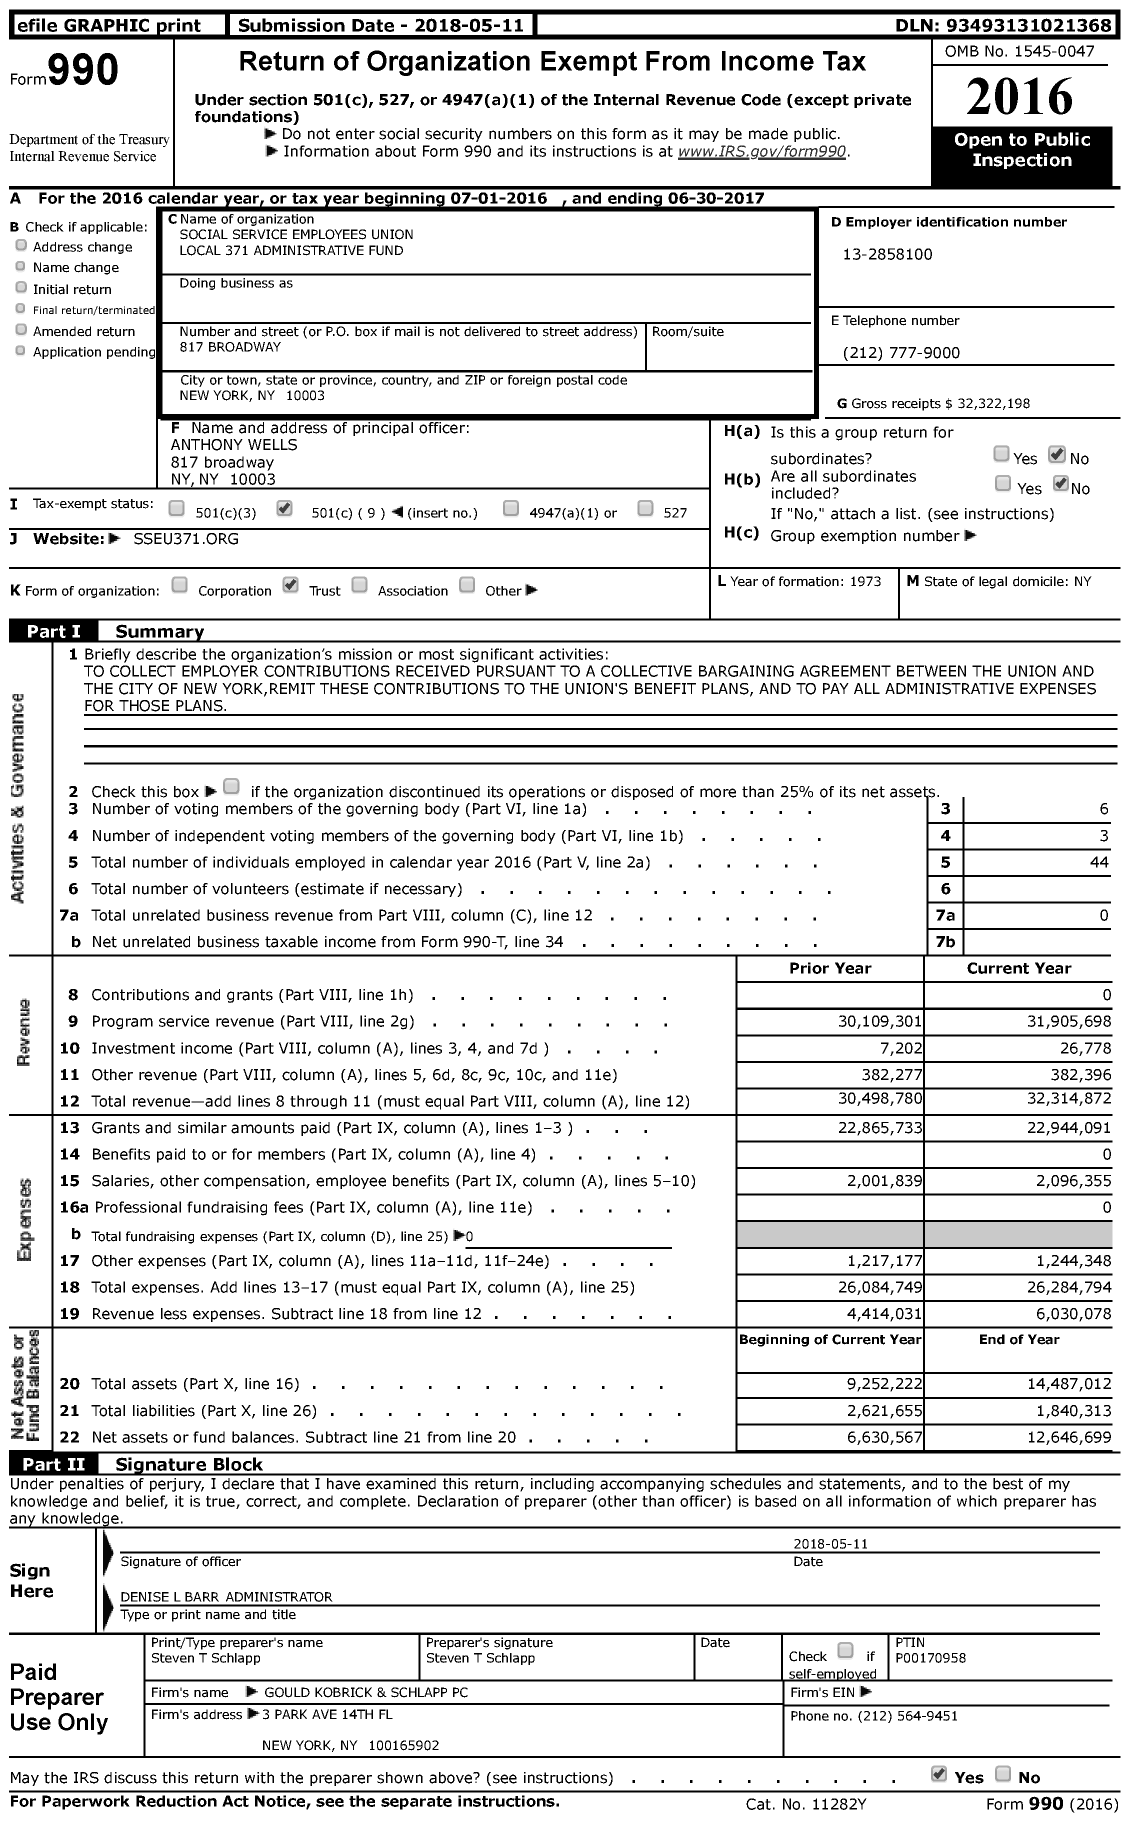 Image of first page of 2016 Form 990 for Social Service Employees Union Local 371 Administrative Fund